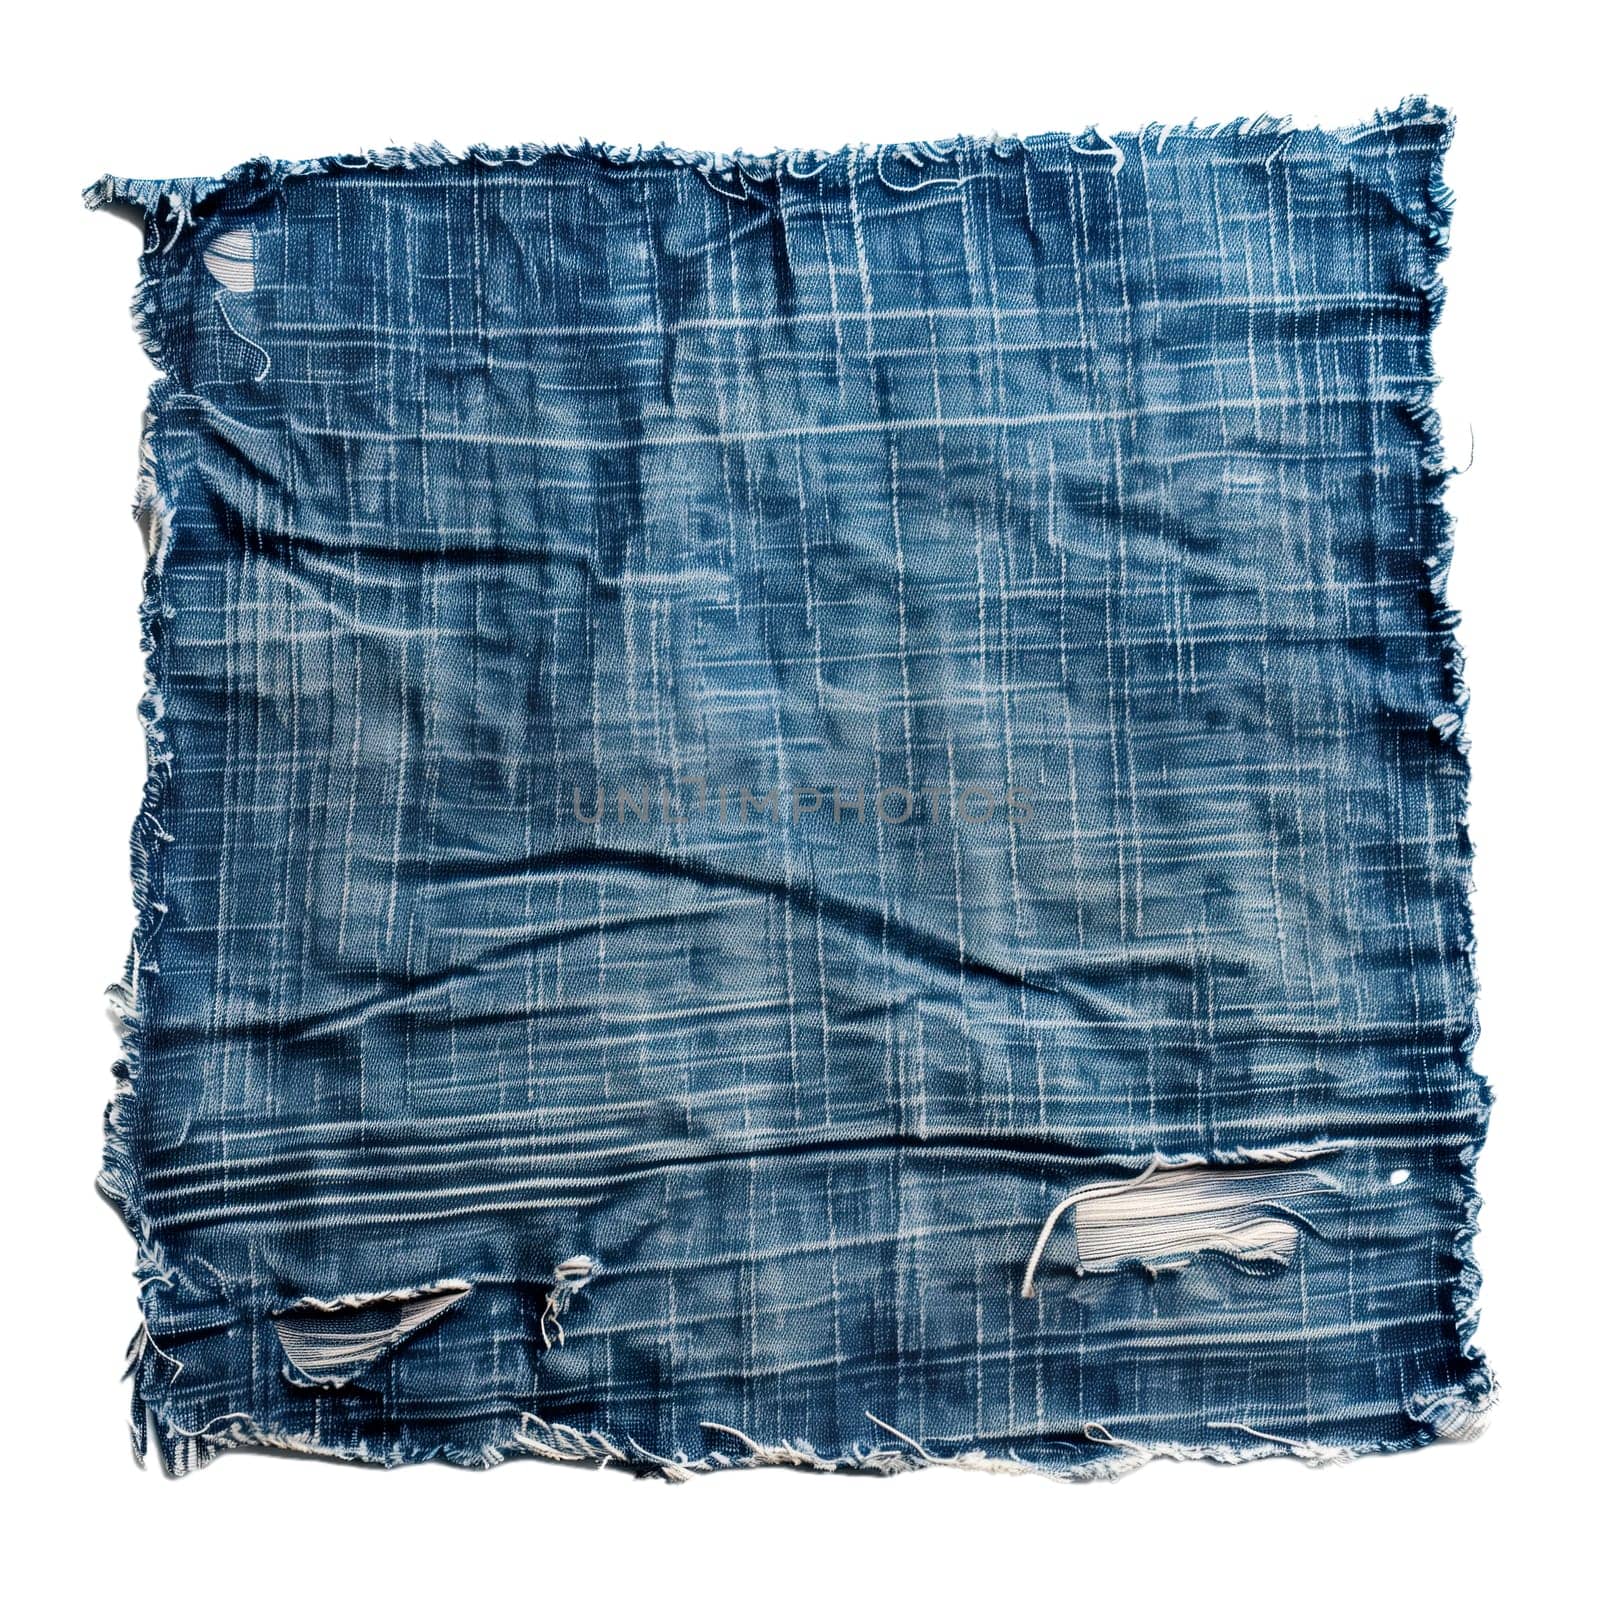 Ragged denim square cloth isolated piece by Dustick